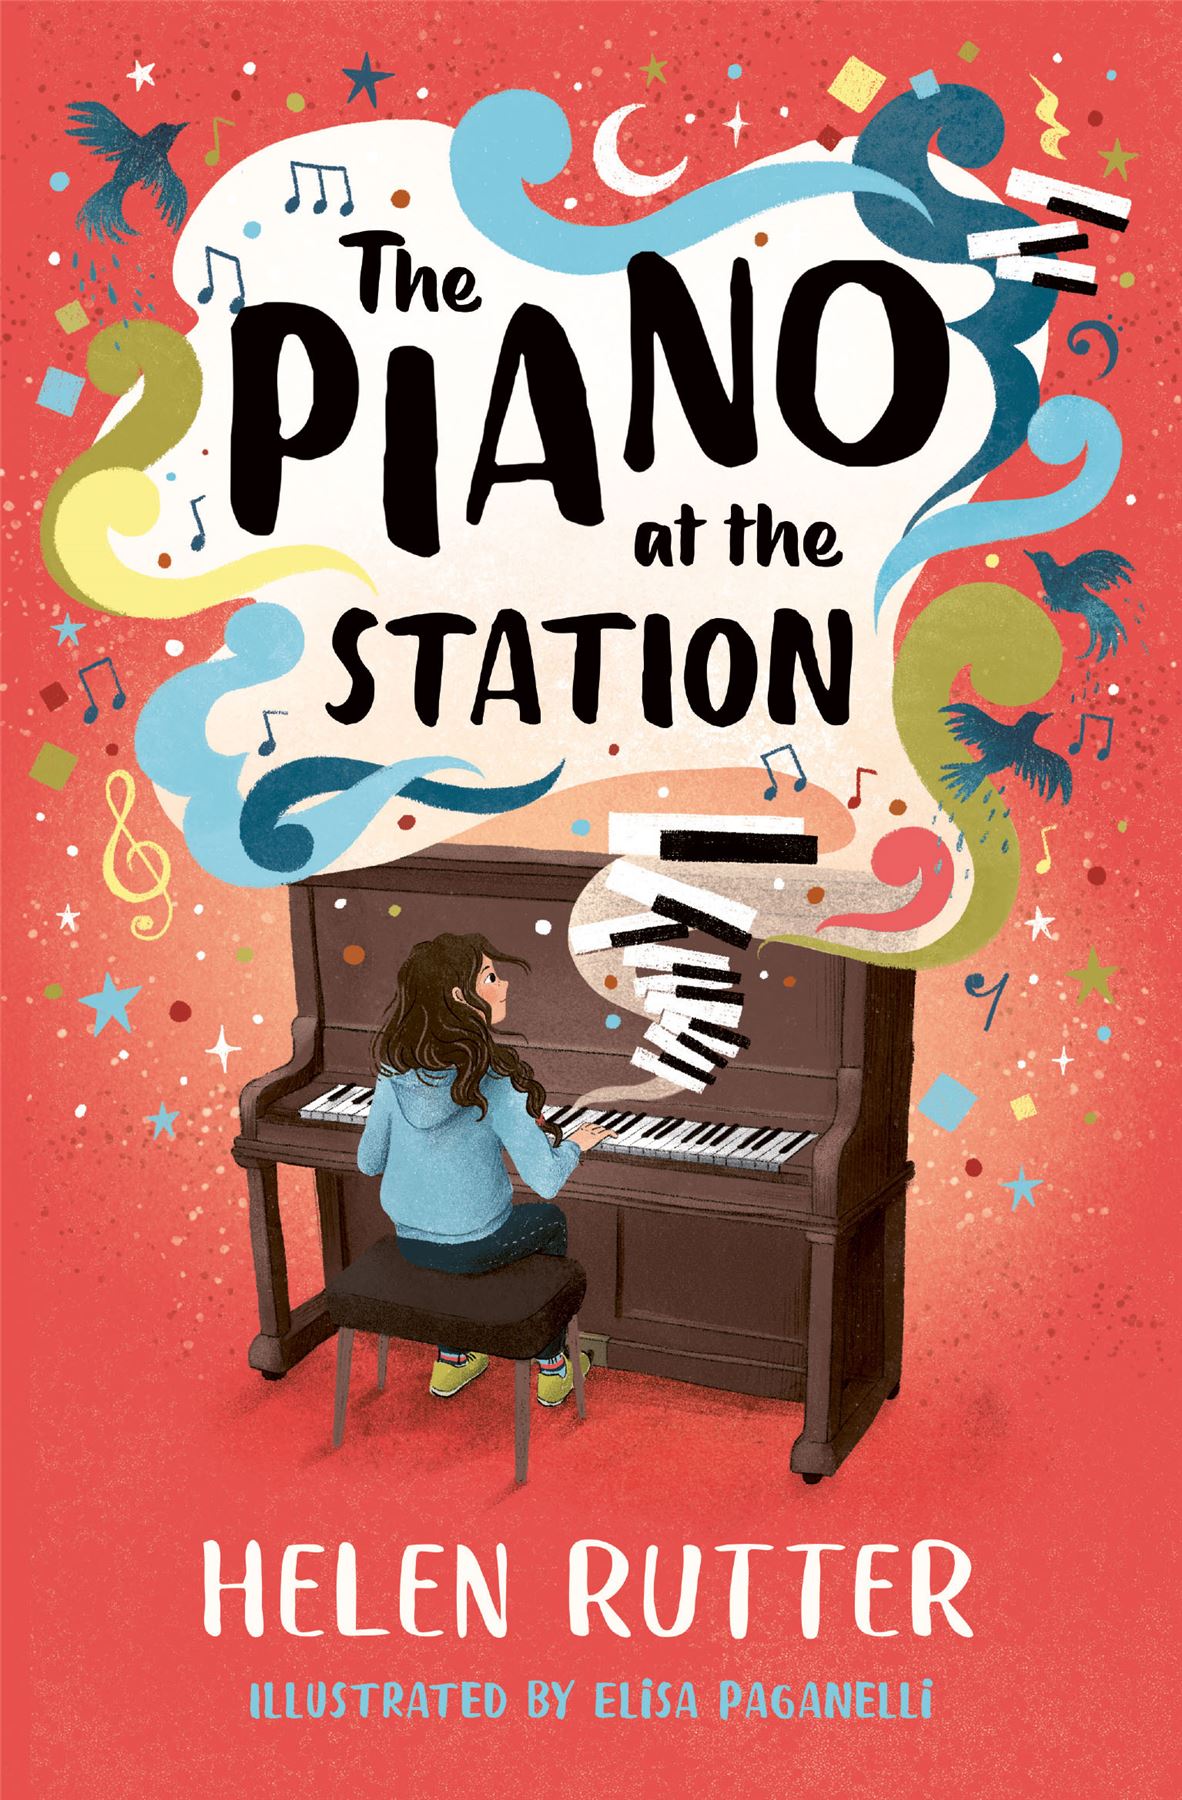 The Piano at the Station